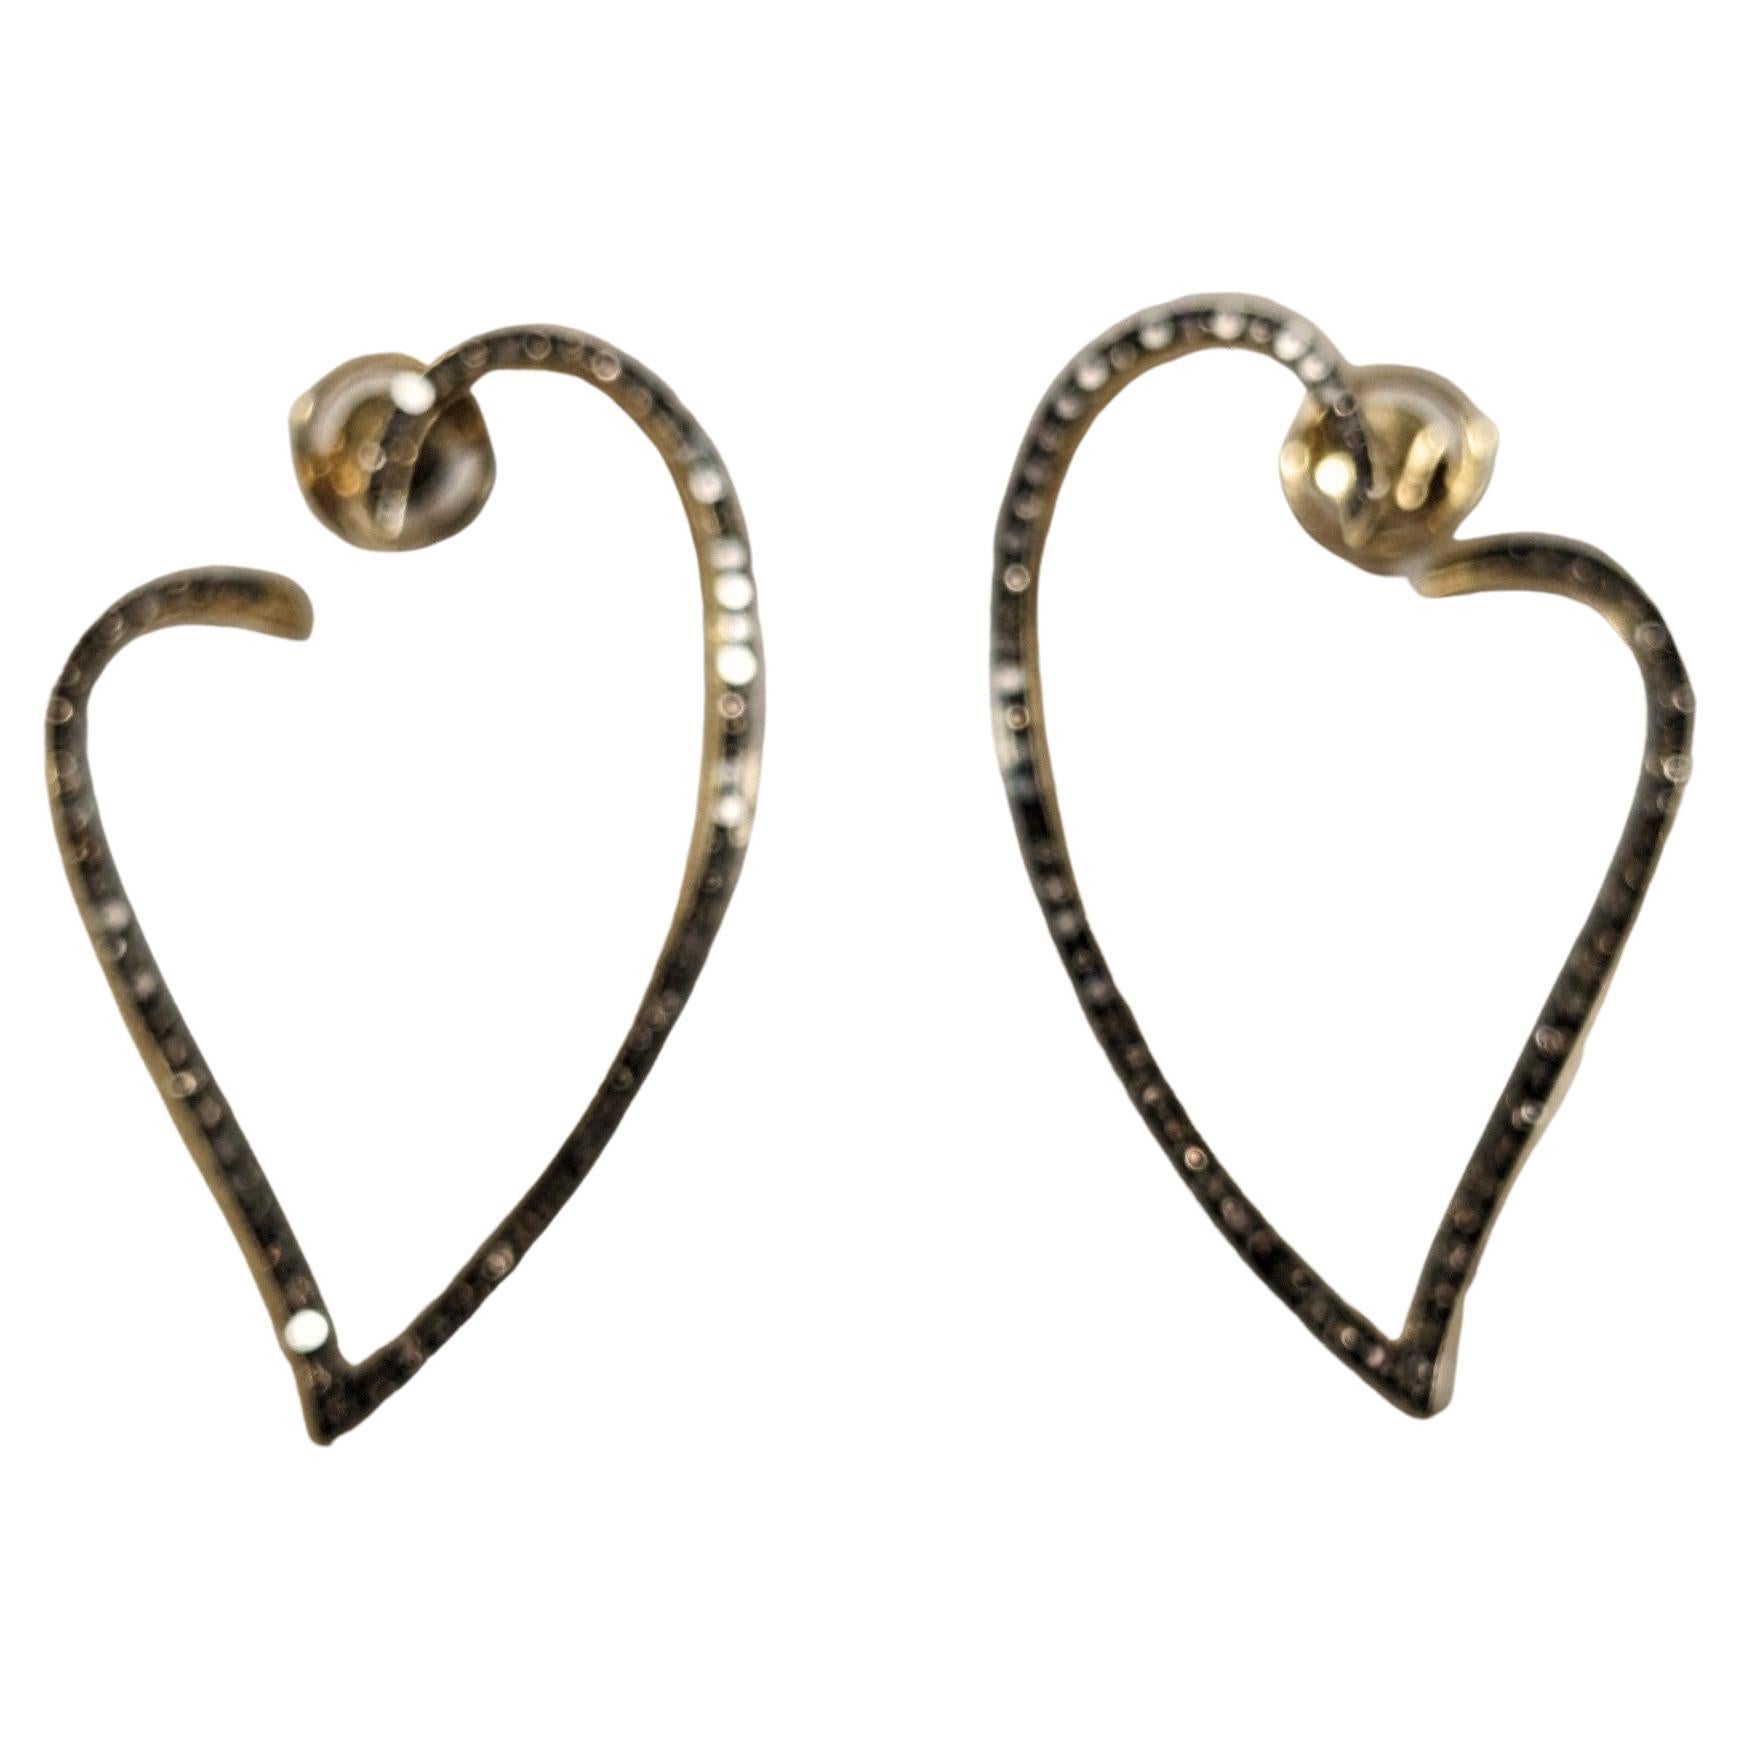 Long Yellow Gold Earrings with Brown Diamonds
Long earrings in yellow gold, with an openwork, wavy heart motif, with a row of brilliant-cut brown diamonds in front
138 btes  1,30ct aprox  
Purity  VS
Dimension  42x24mm


READY TO SHIP
*Shipment of